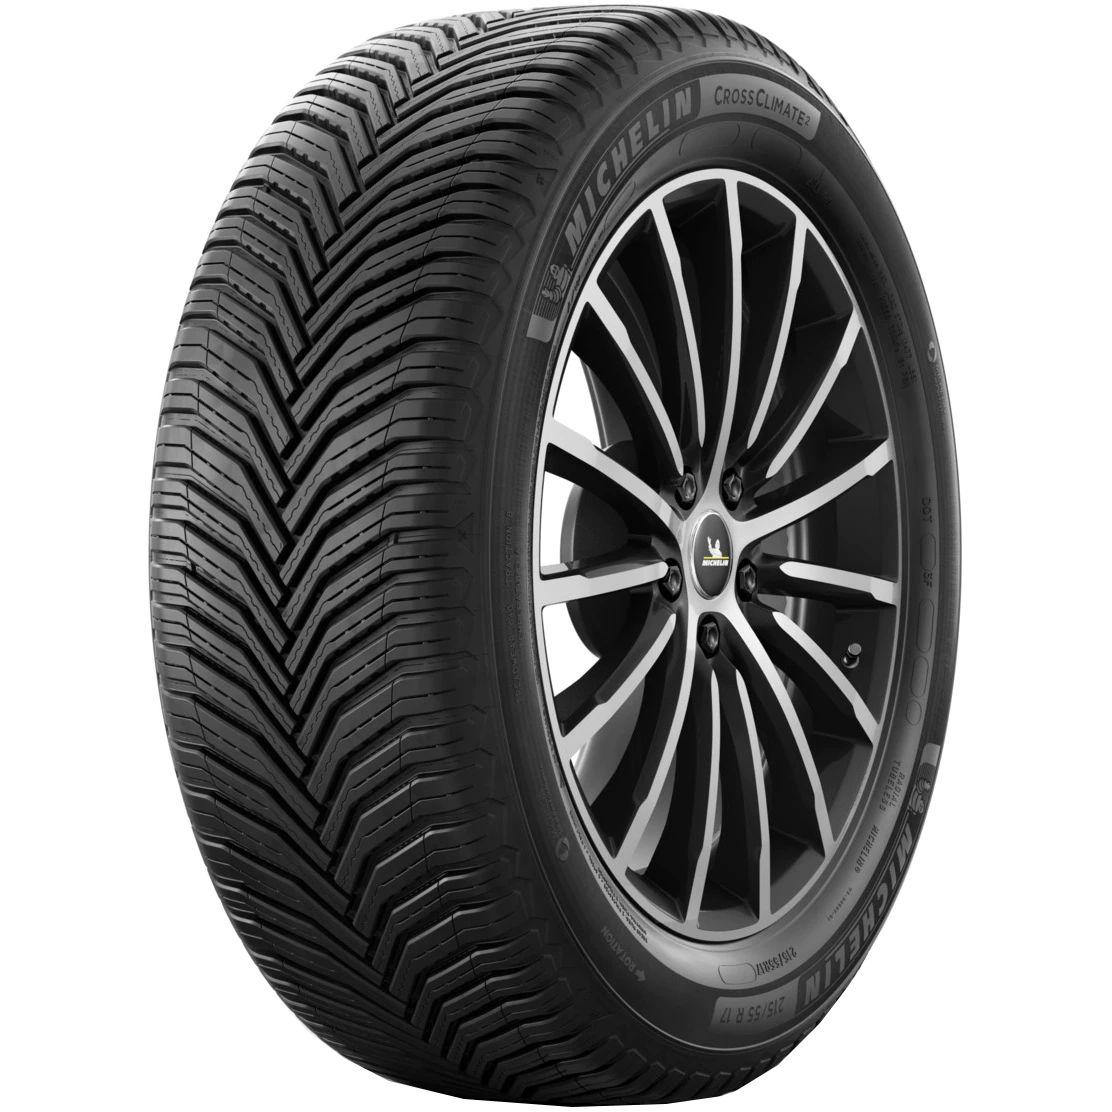 Anvelope all seasons MICHELIN CrossClimate2 M+S XL 205/60 R16 92H